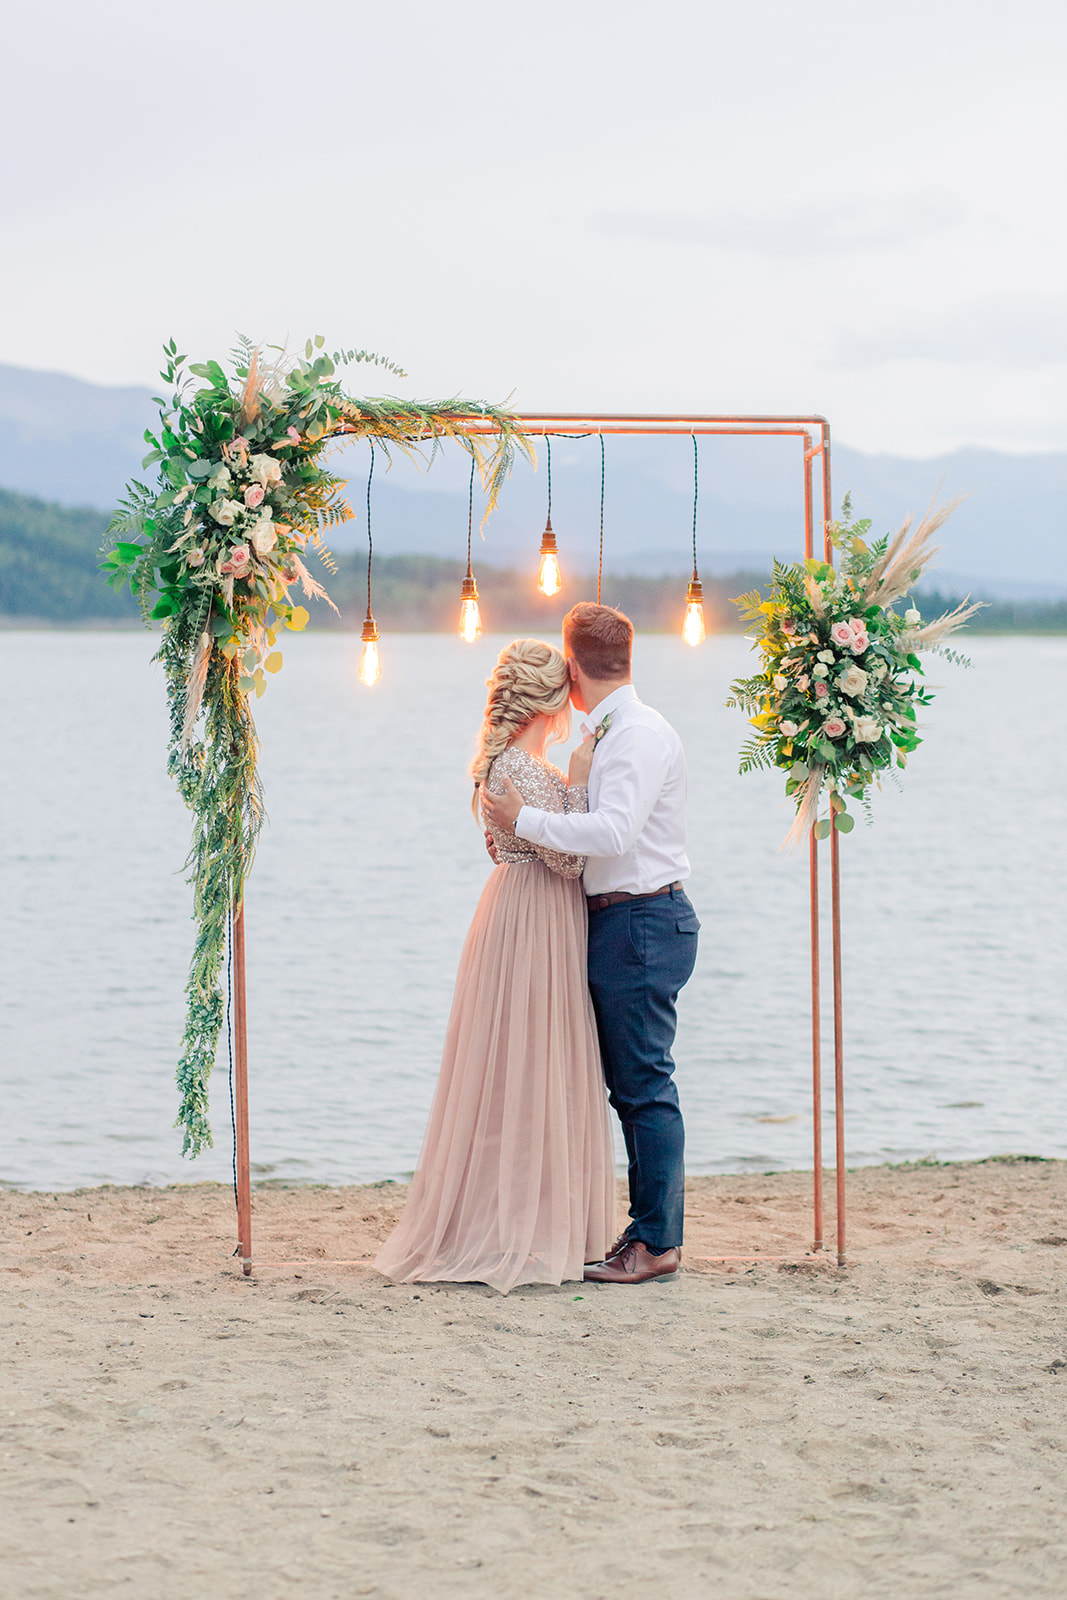 Intimate wedding decor and industrial lighting for this lakeside elopement with blush and gold hues